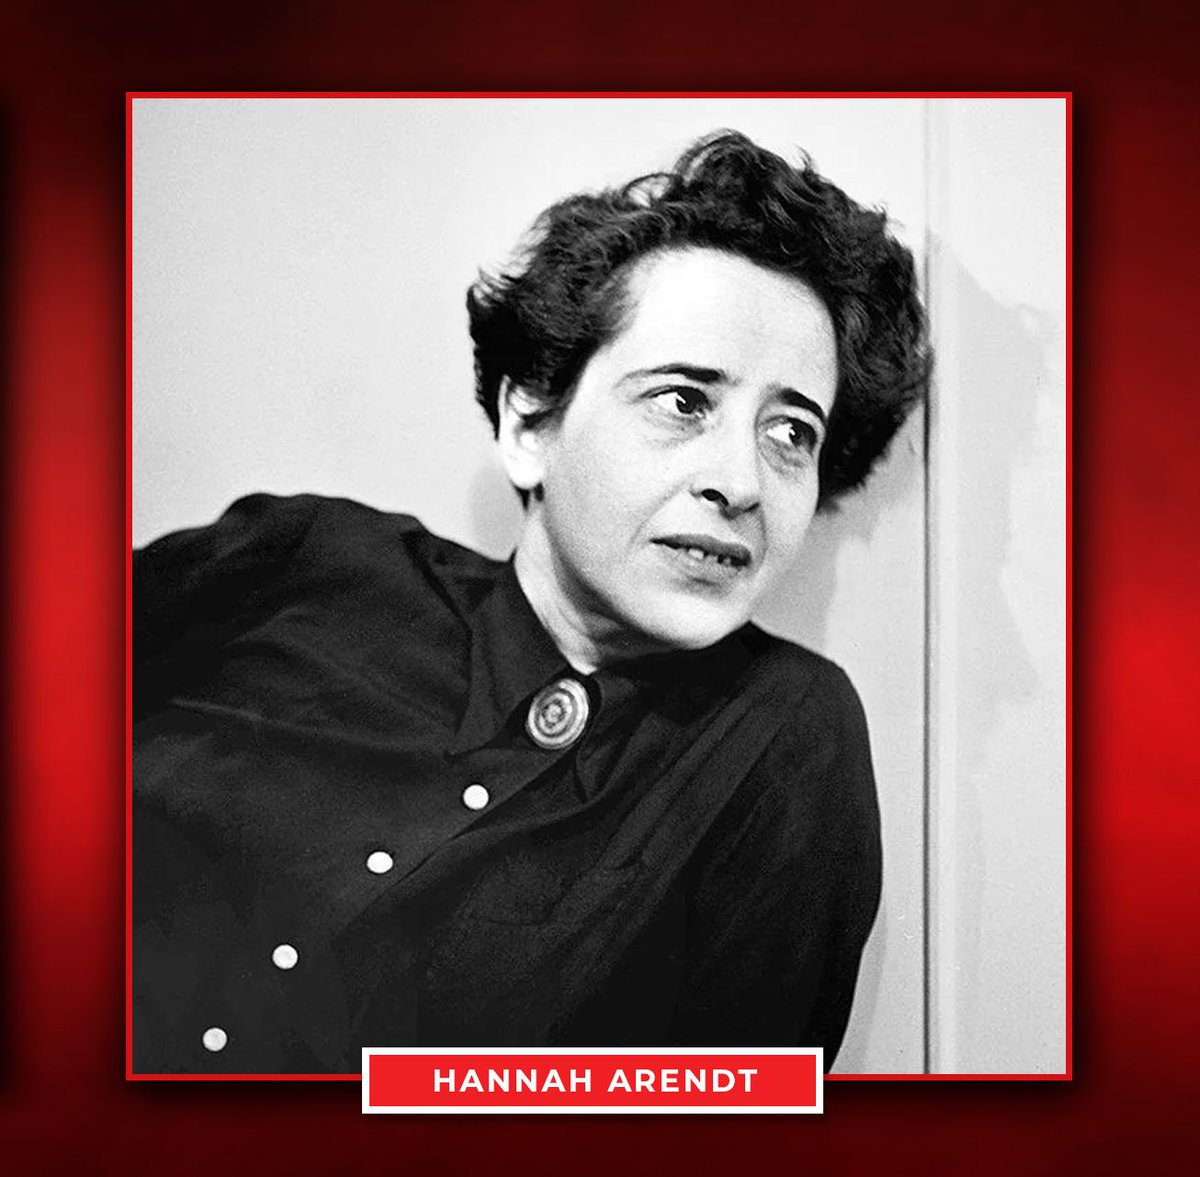 #ST10WeAdmire Hannah Arendt (1906–1975), a German-American historian and philosopher, left a profound impact on political theory in the 20th century. Her extensive body of work delves into crucial themes like power, politics, direct democracy, authority, and totalitarianism.